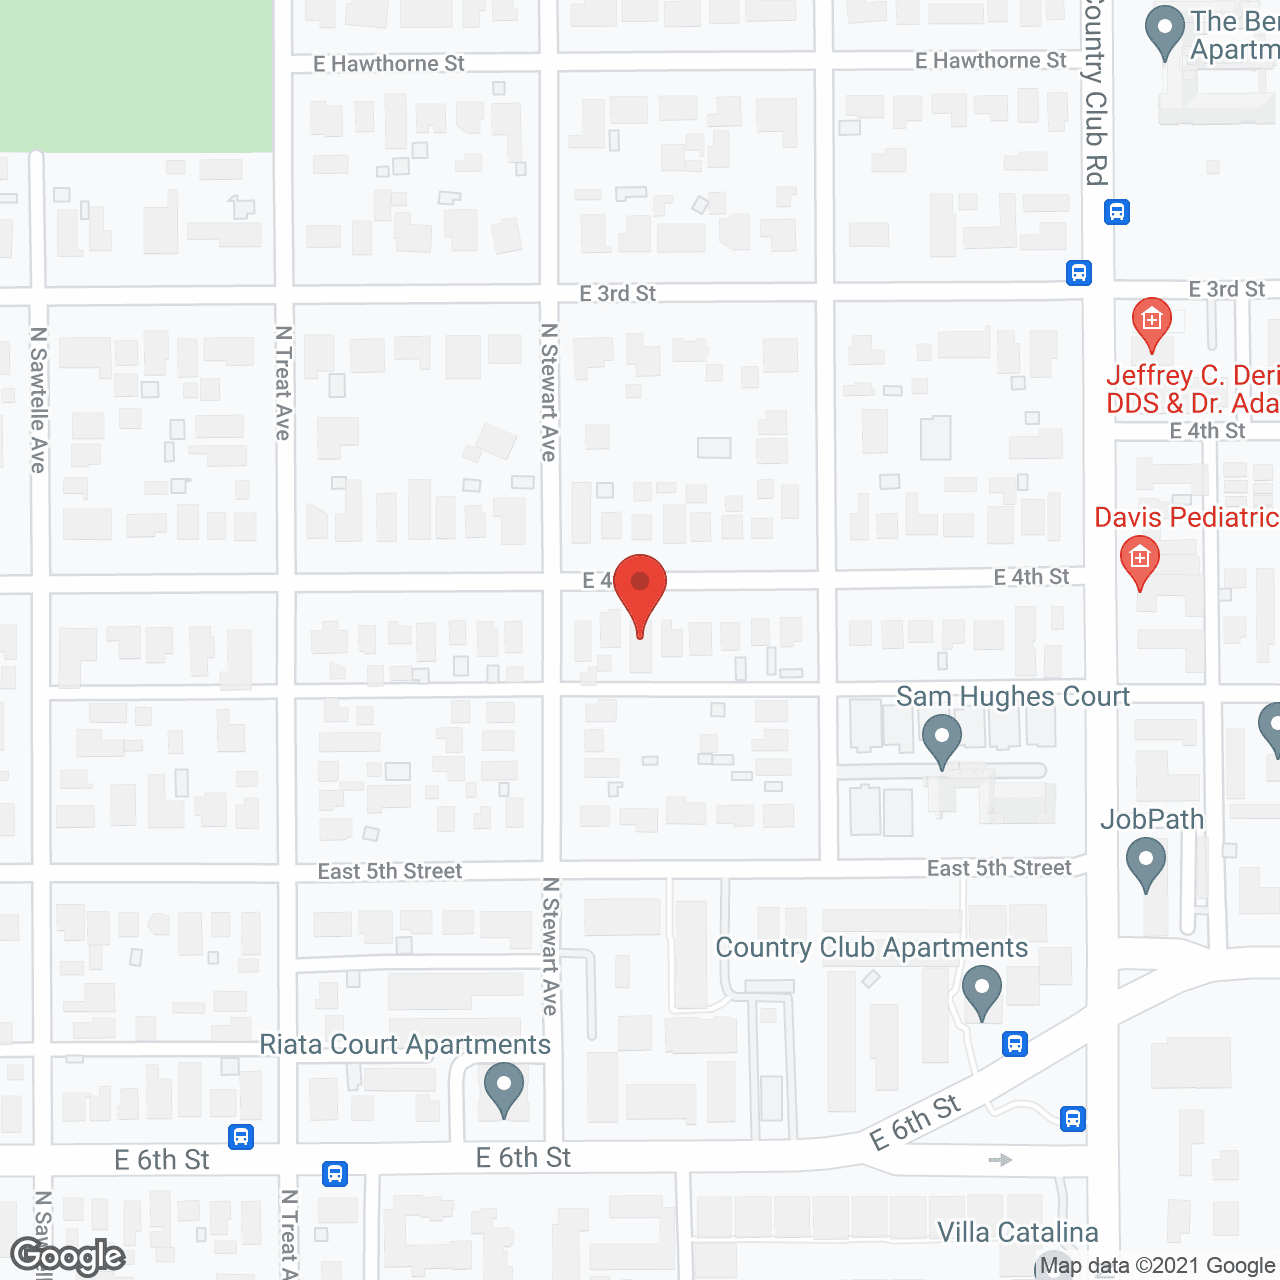 Akator's Assisted Living Home in google map